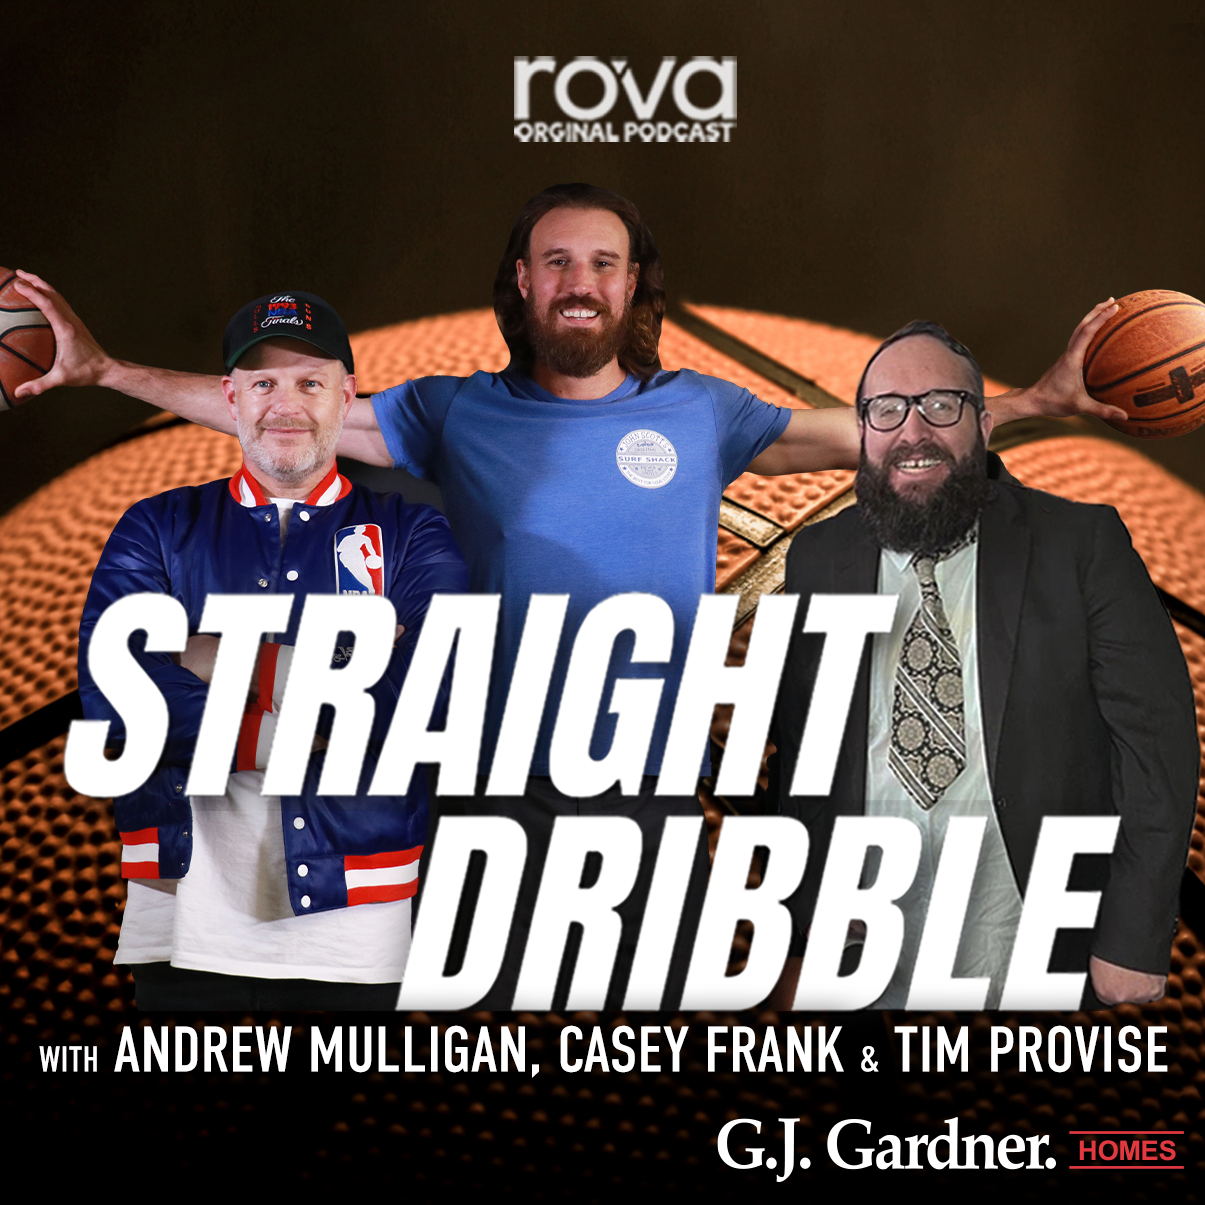 Straight Dribble - Can the Boston Celtics Return to Form?